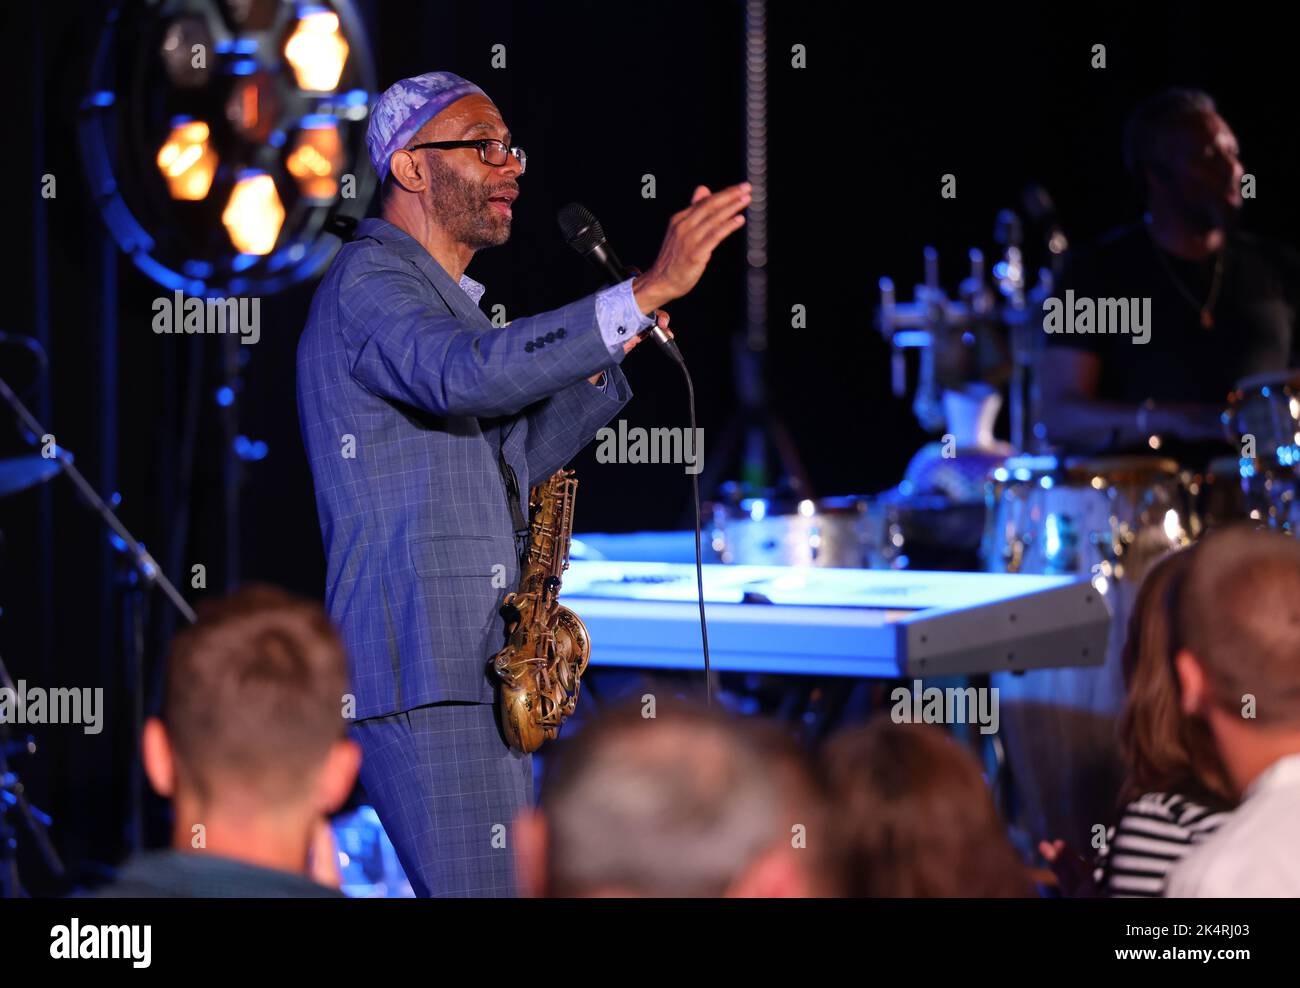 Cracow, Poland - July 08, 2022: Kenny Garrett Quintet performing live on the Kijow Centre stage at Summer Jazz Festival in Cracow, Poland Stock Photo